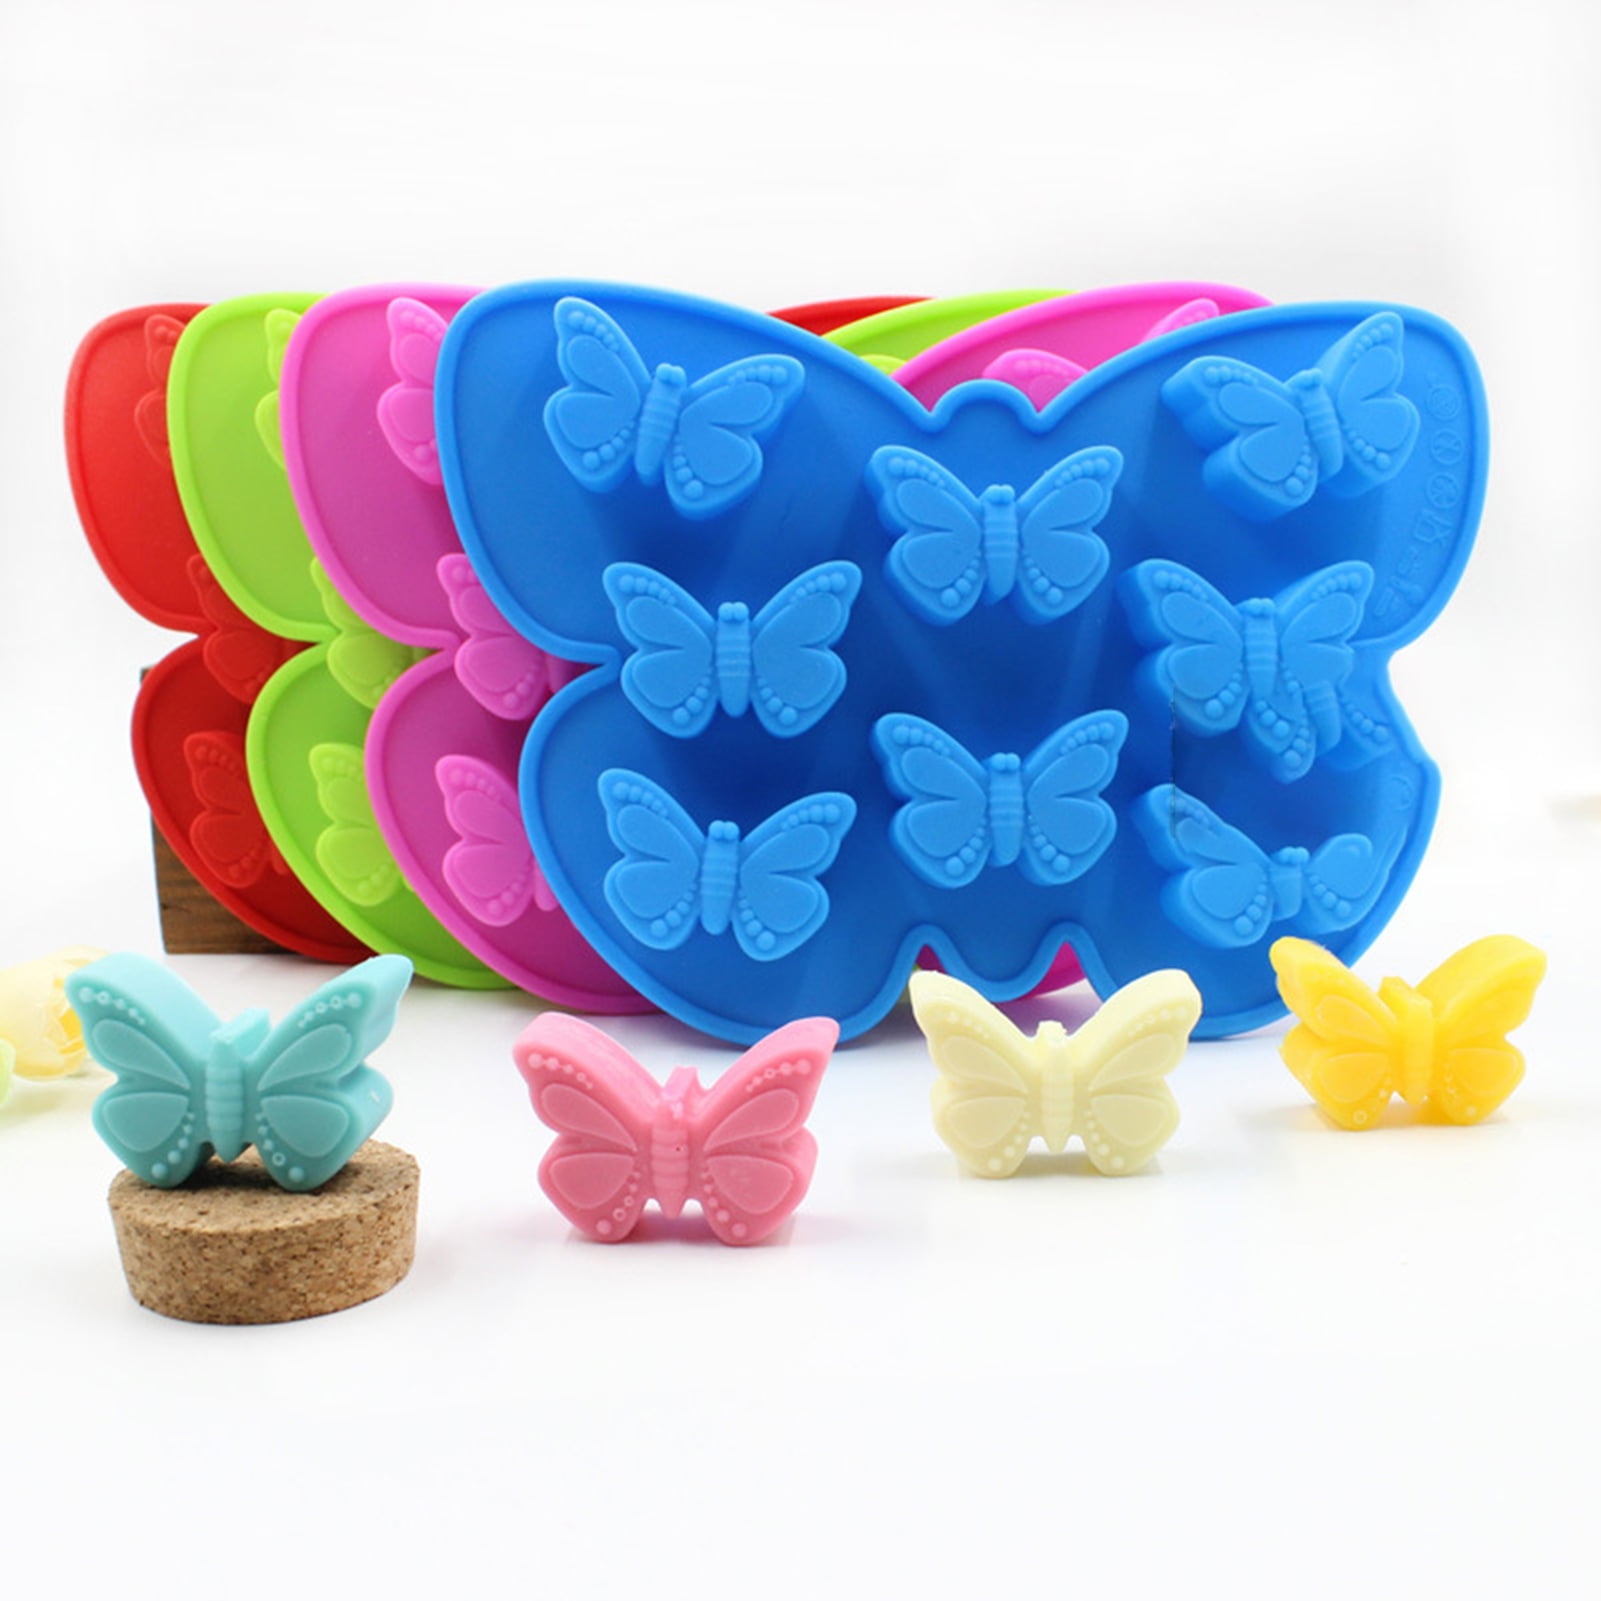 3D Silicone Butterfly Fondant Cake Soap Mould Bakeware Baking Decoration Tools 